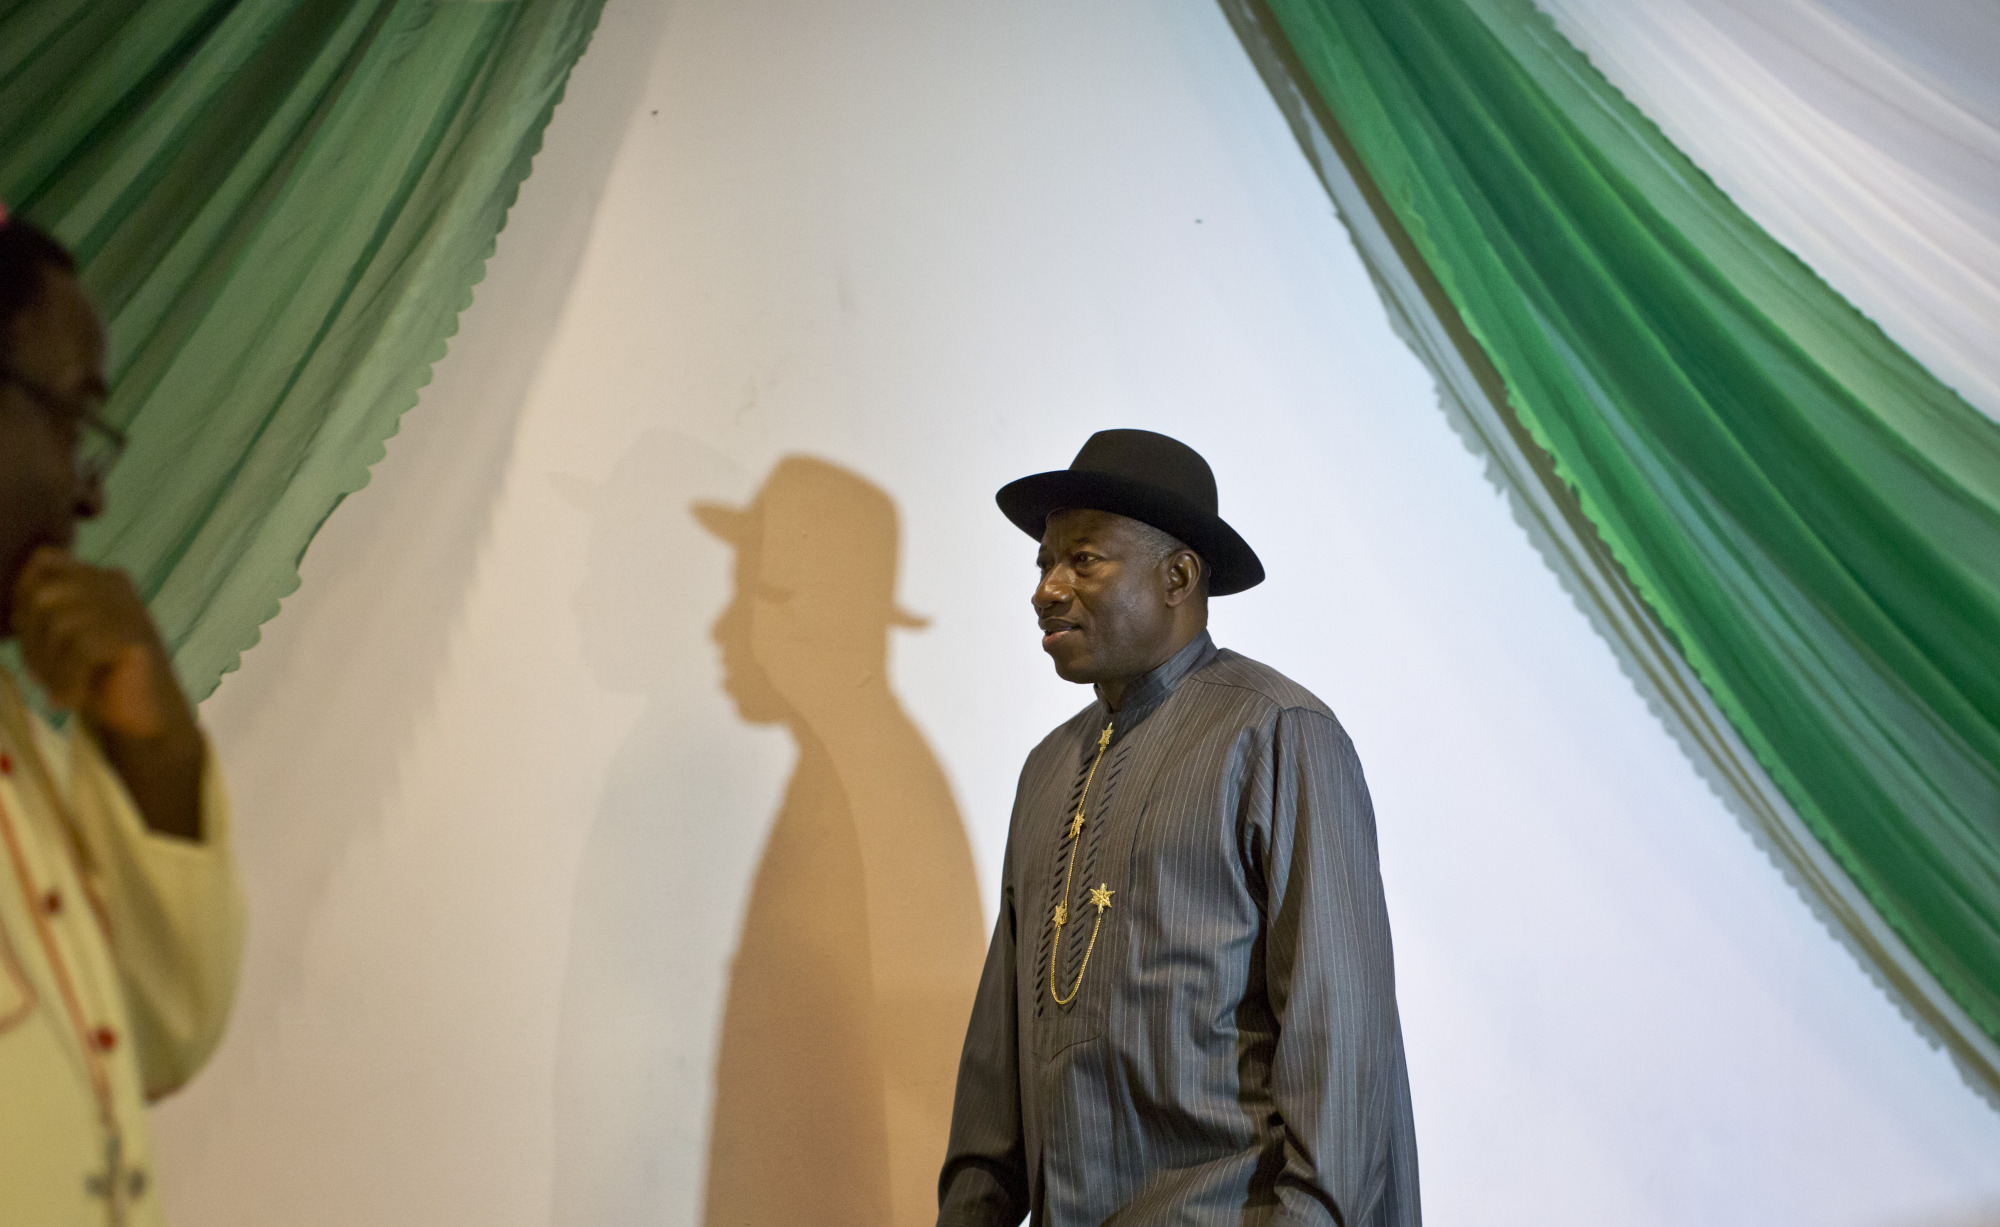 Nigerian President Goodluck Jonathan, center, arrives on stage to sign a joint renewal with opposition candidate Gen. Muhammadu Buhari of their pledge to hold peaceful "free, fair, and credible" elections, at a hotel in the capital Abuja, Nigeria Thursday, March 26, 2015. Nigerians are due to go to the polls to vote in presidential elections on Saturday. (AP Photo/Ben Curtis)